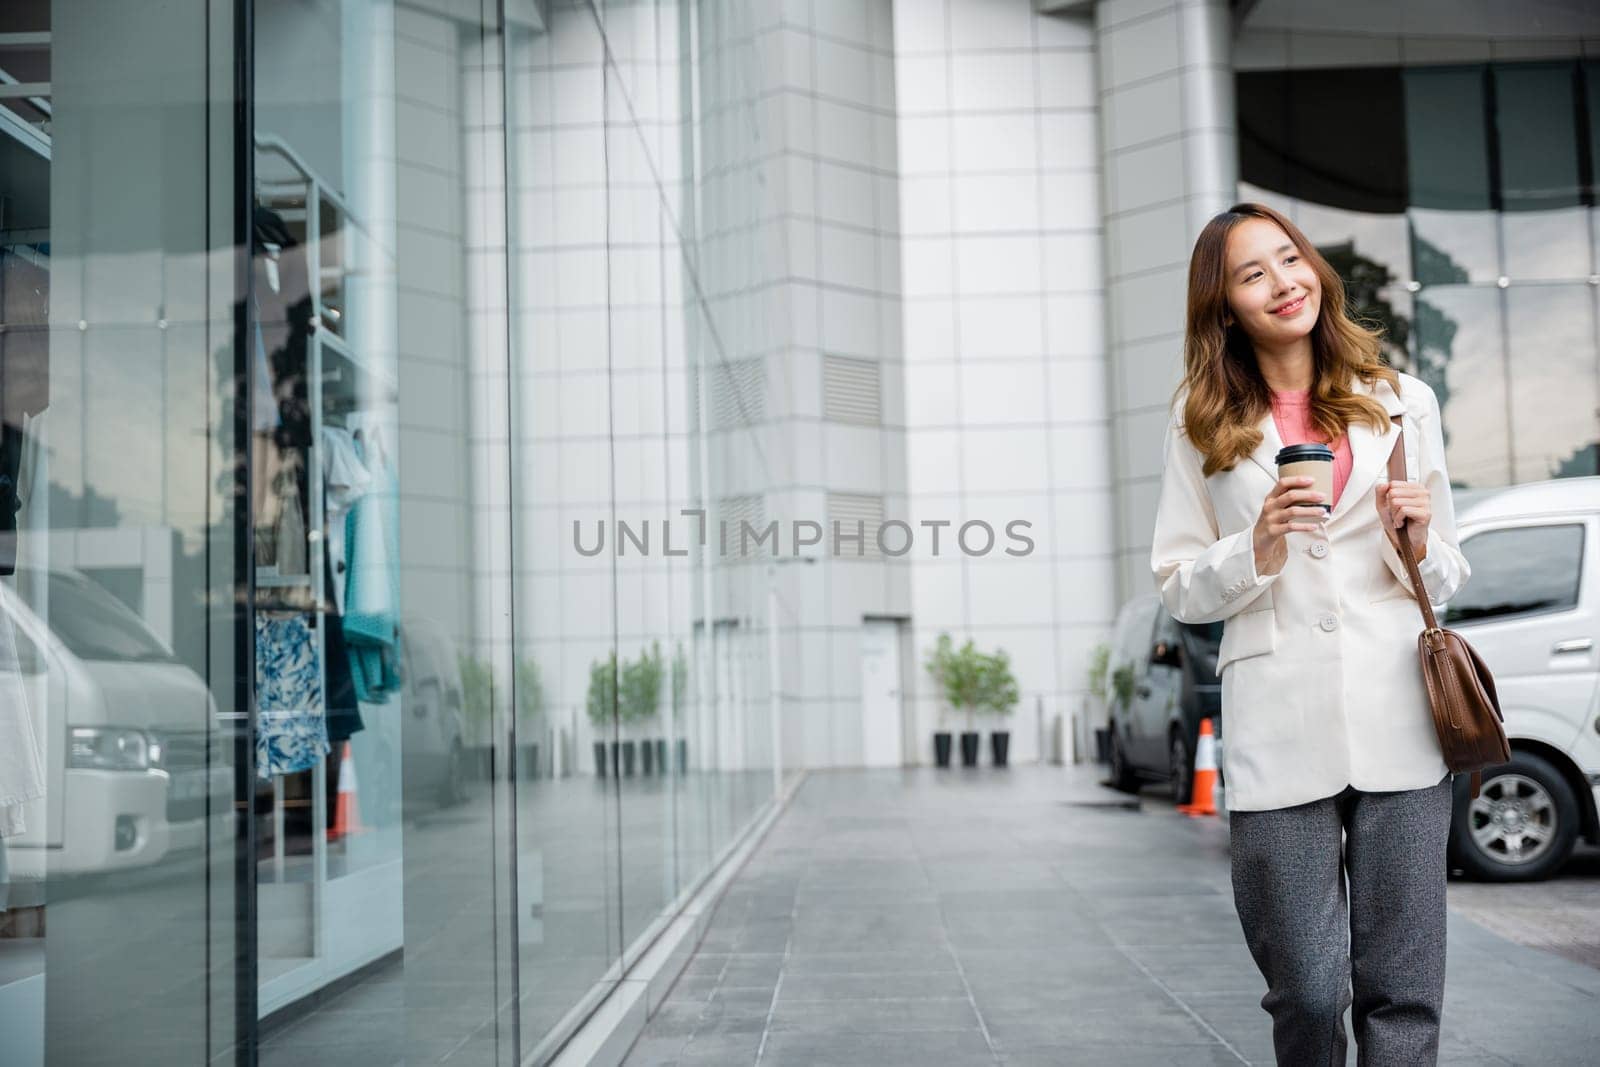 A woman uses her phone to stay connected while drinking coffee outside her office building. She is a modern business professional.